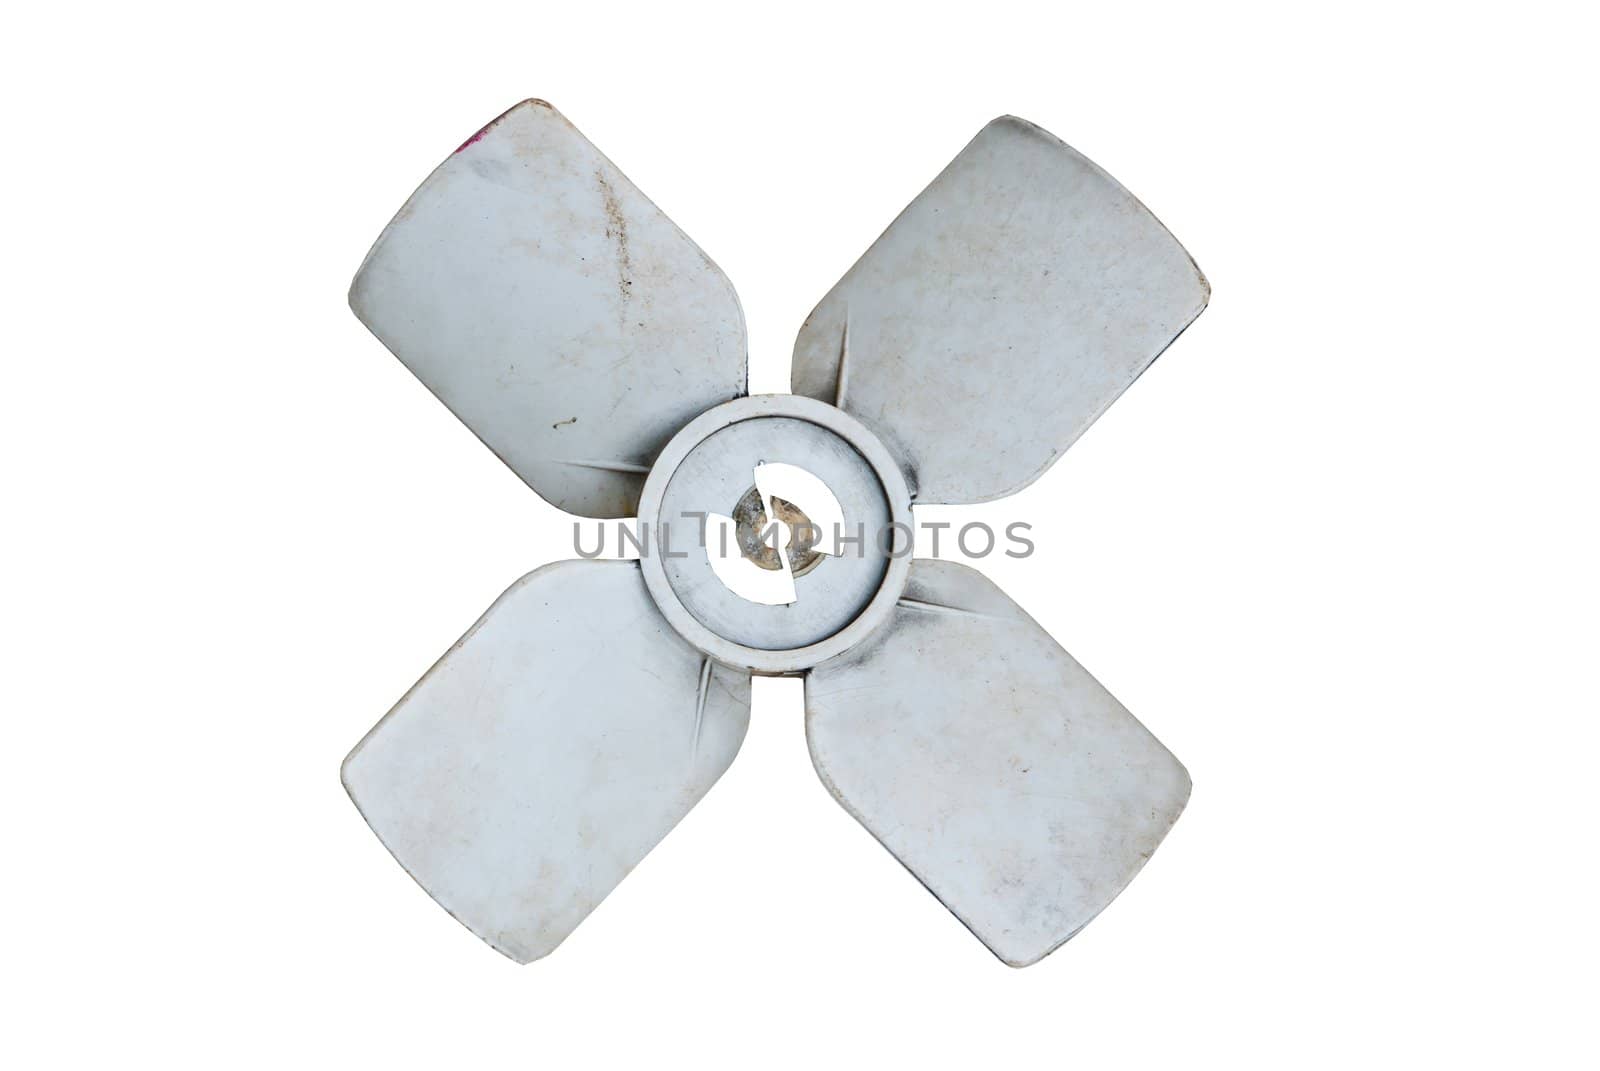 Dirty plastic white fan
 by sasilsolutions